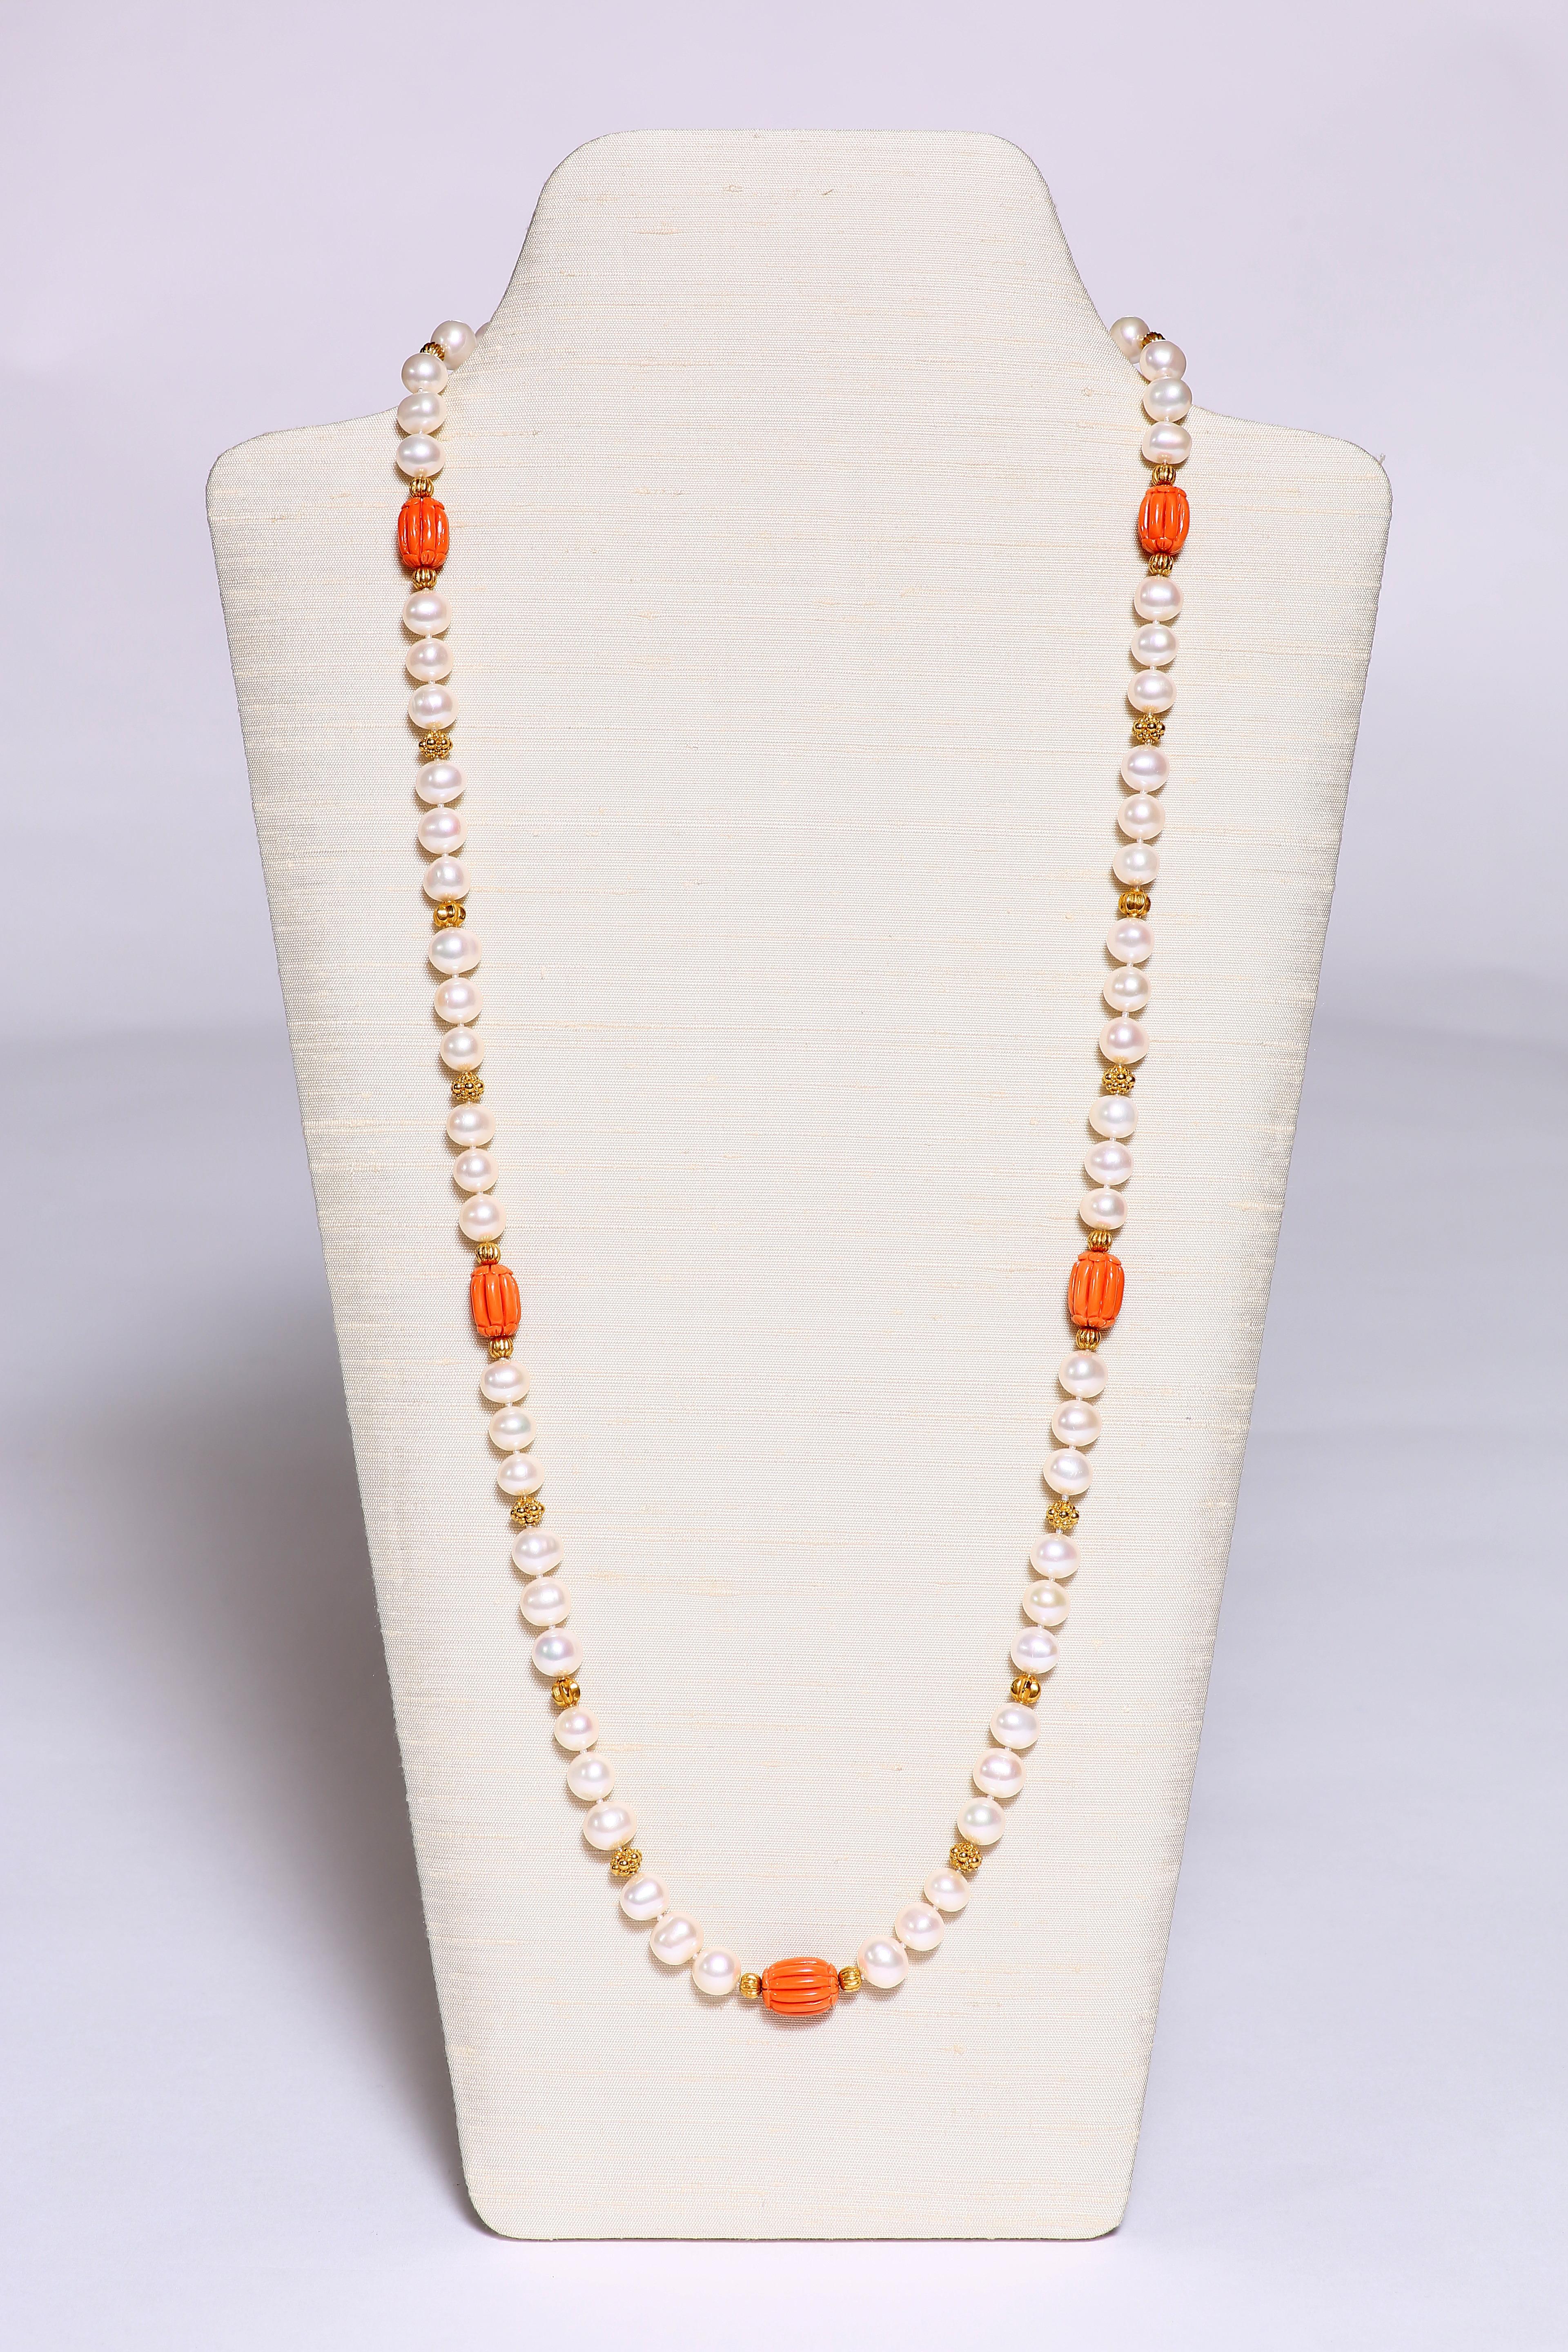 Sardinian coral, freshwater pearls and faceted gold beads form this stunning long 32 1/2